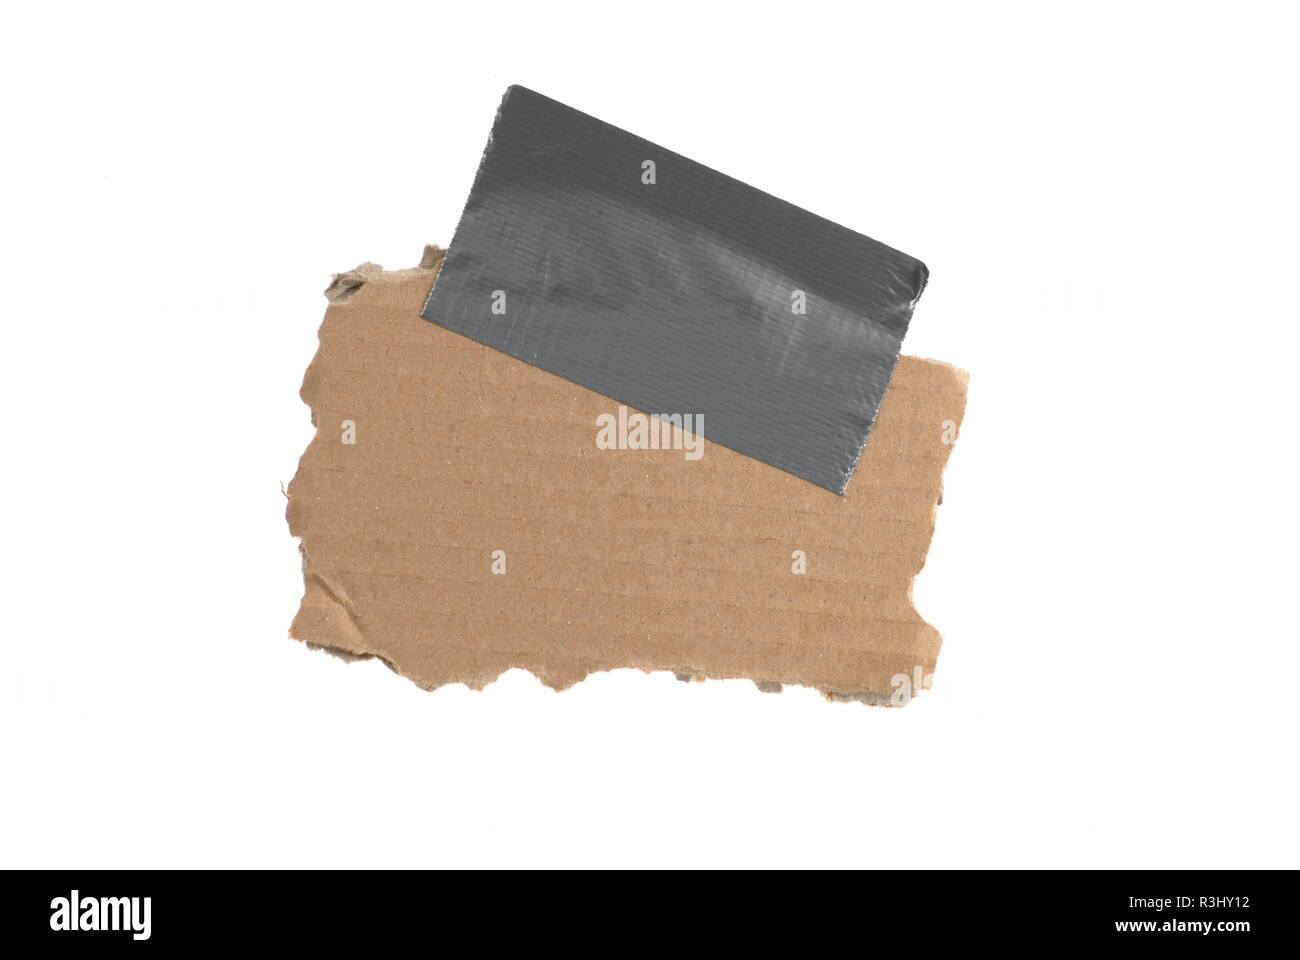 isolated old cardboard with adhesive tape and copy space Stock Photo